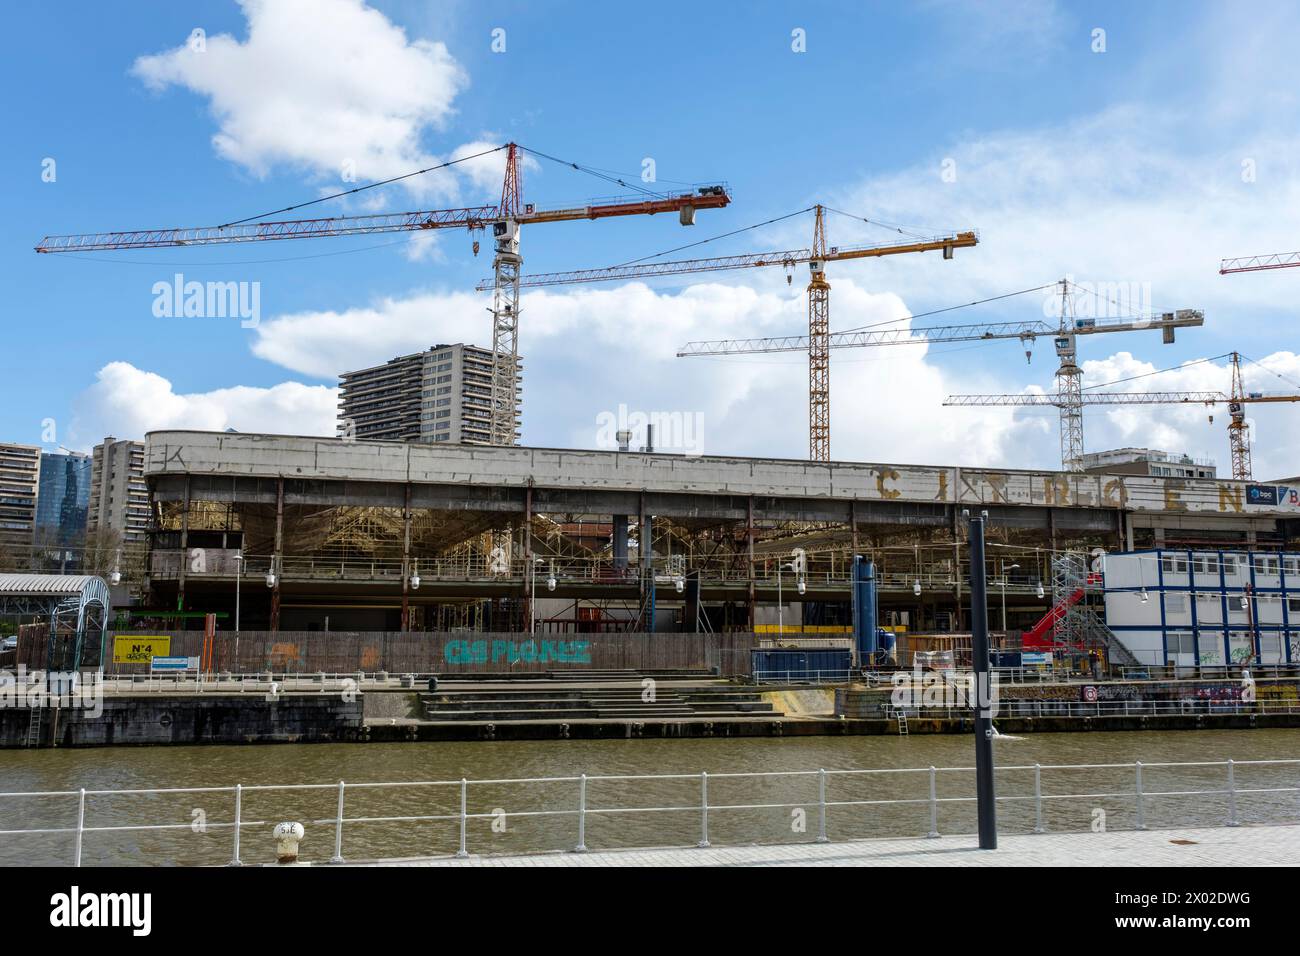 Cranes at work on a building site near the Place des armateurs and the Vergote basin on the Brussels Canal |  Grues au travail sur un chantier pres du Stock Photo